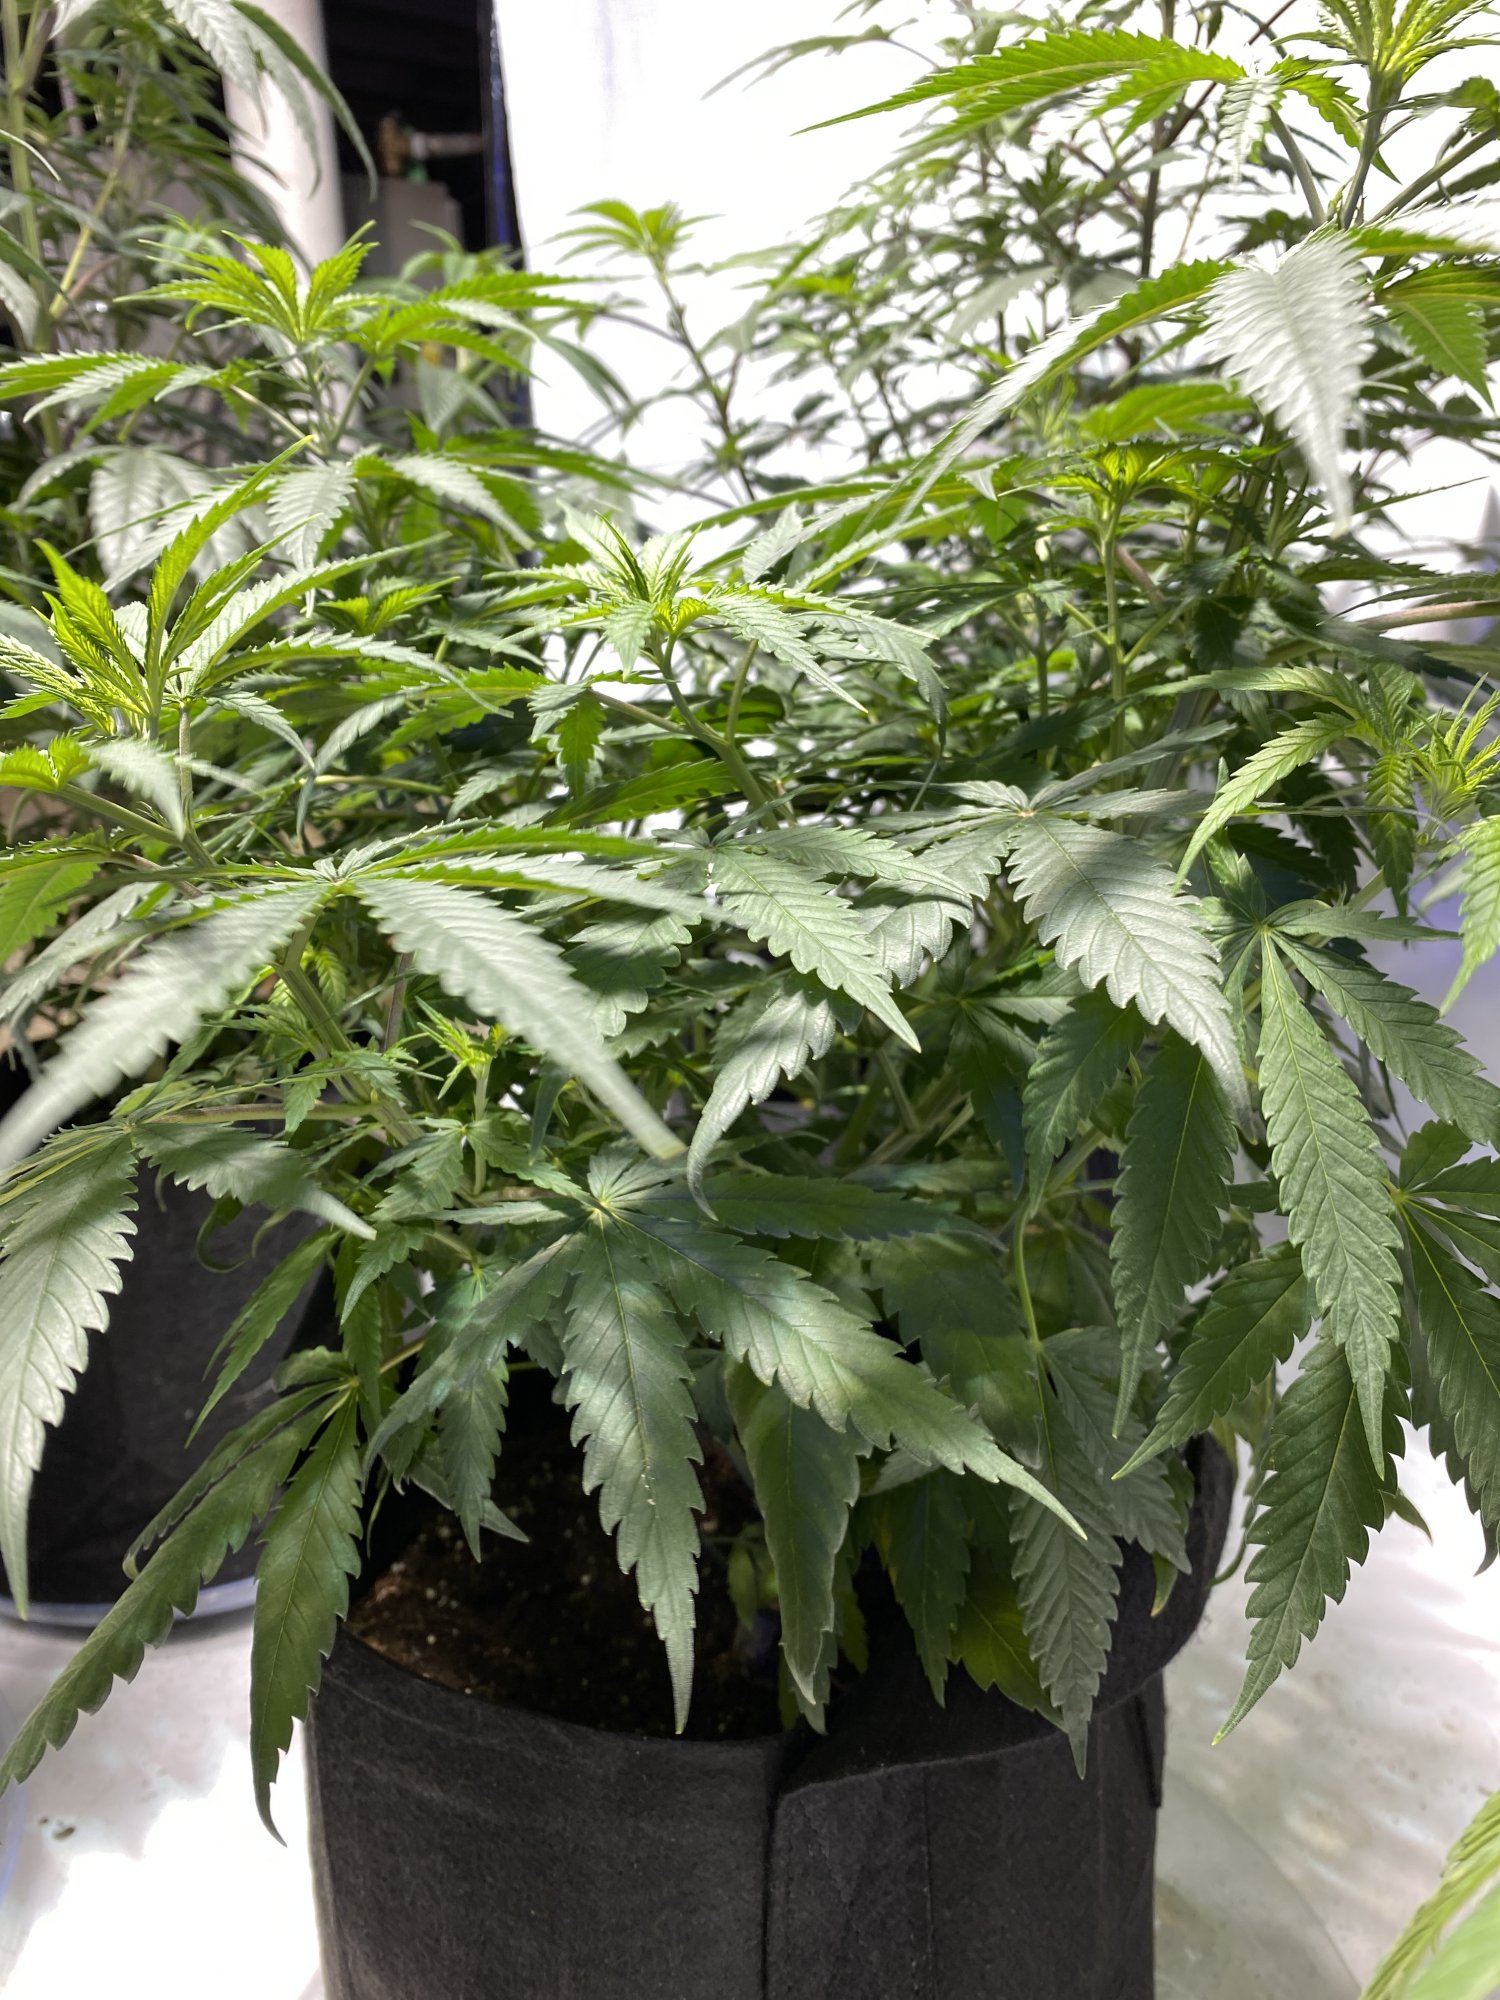 Suggestions before switching for 2nd grow 2